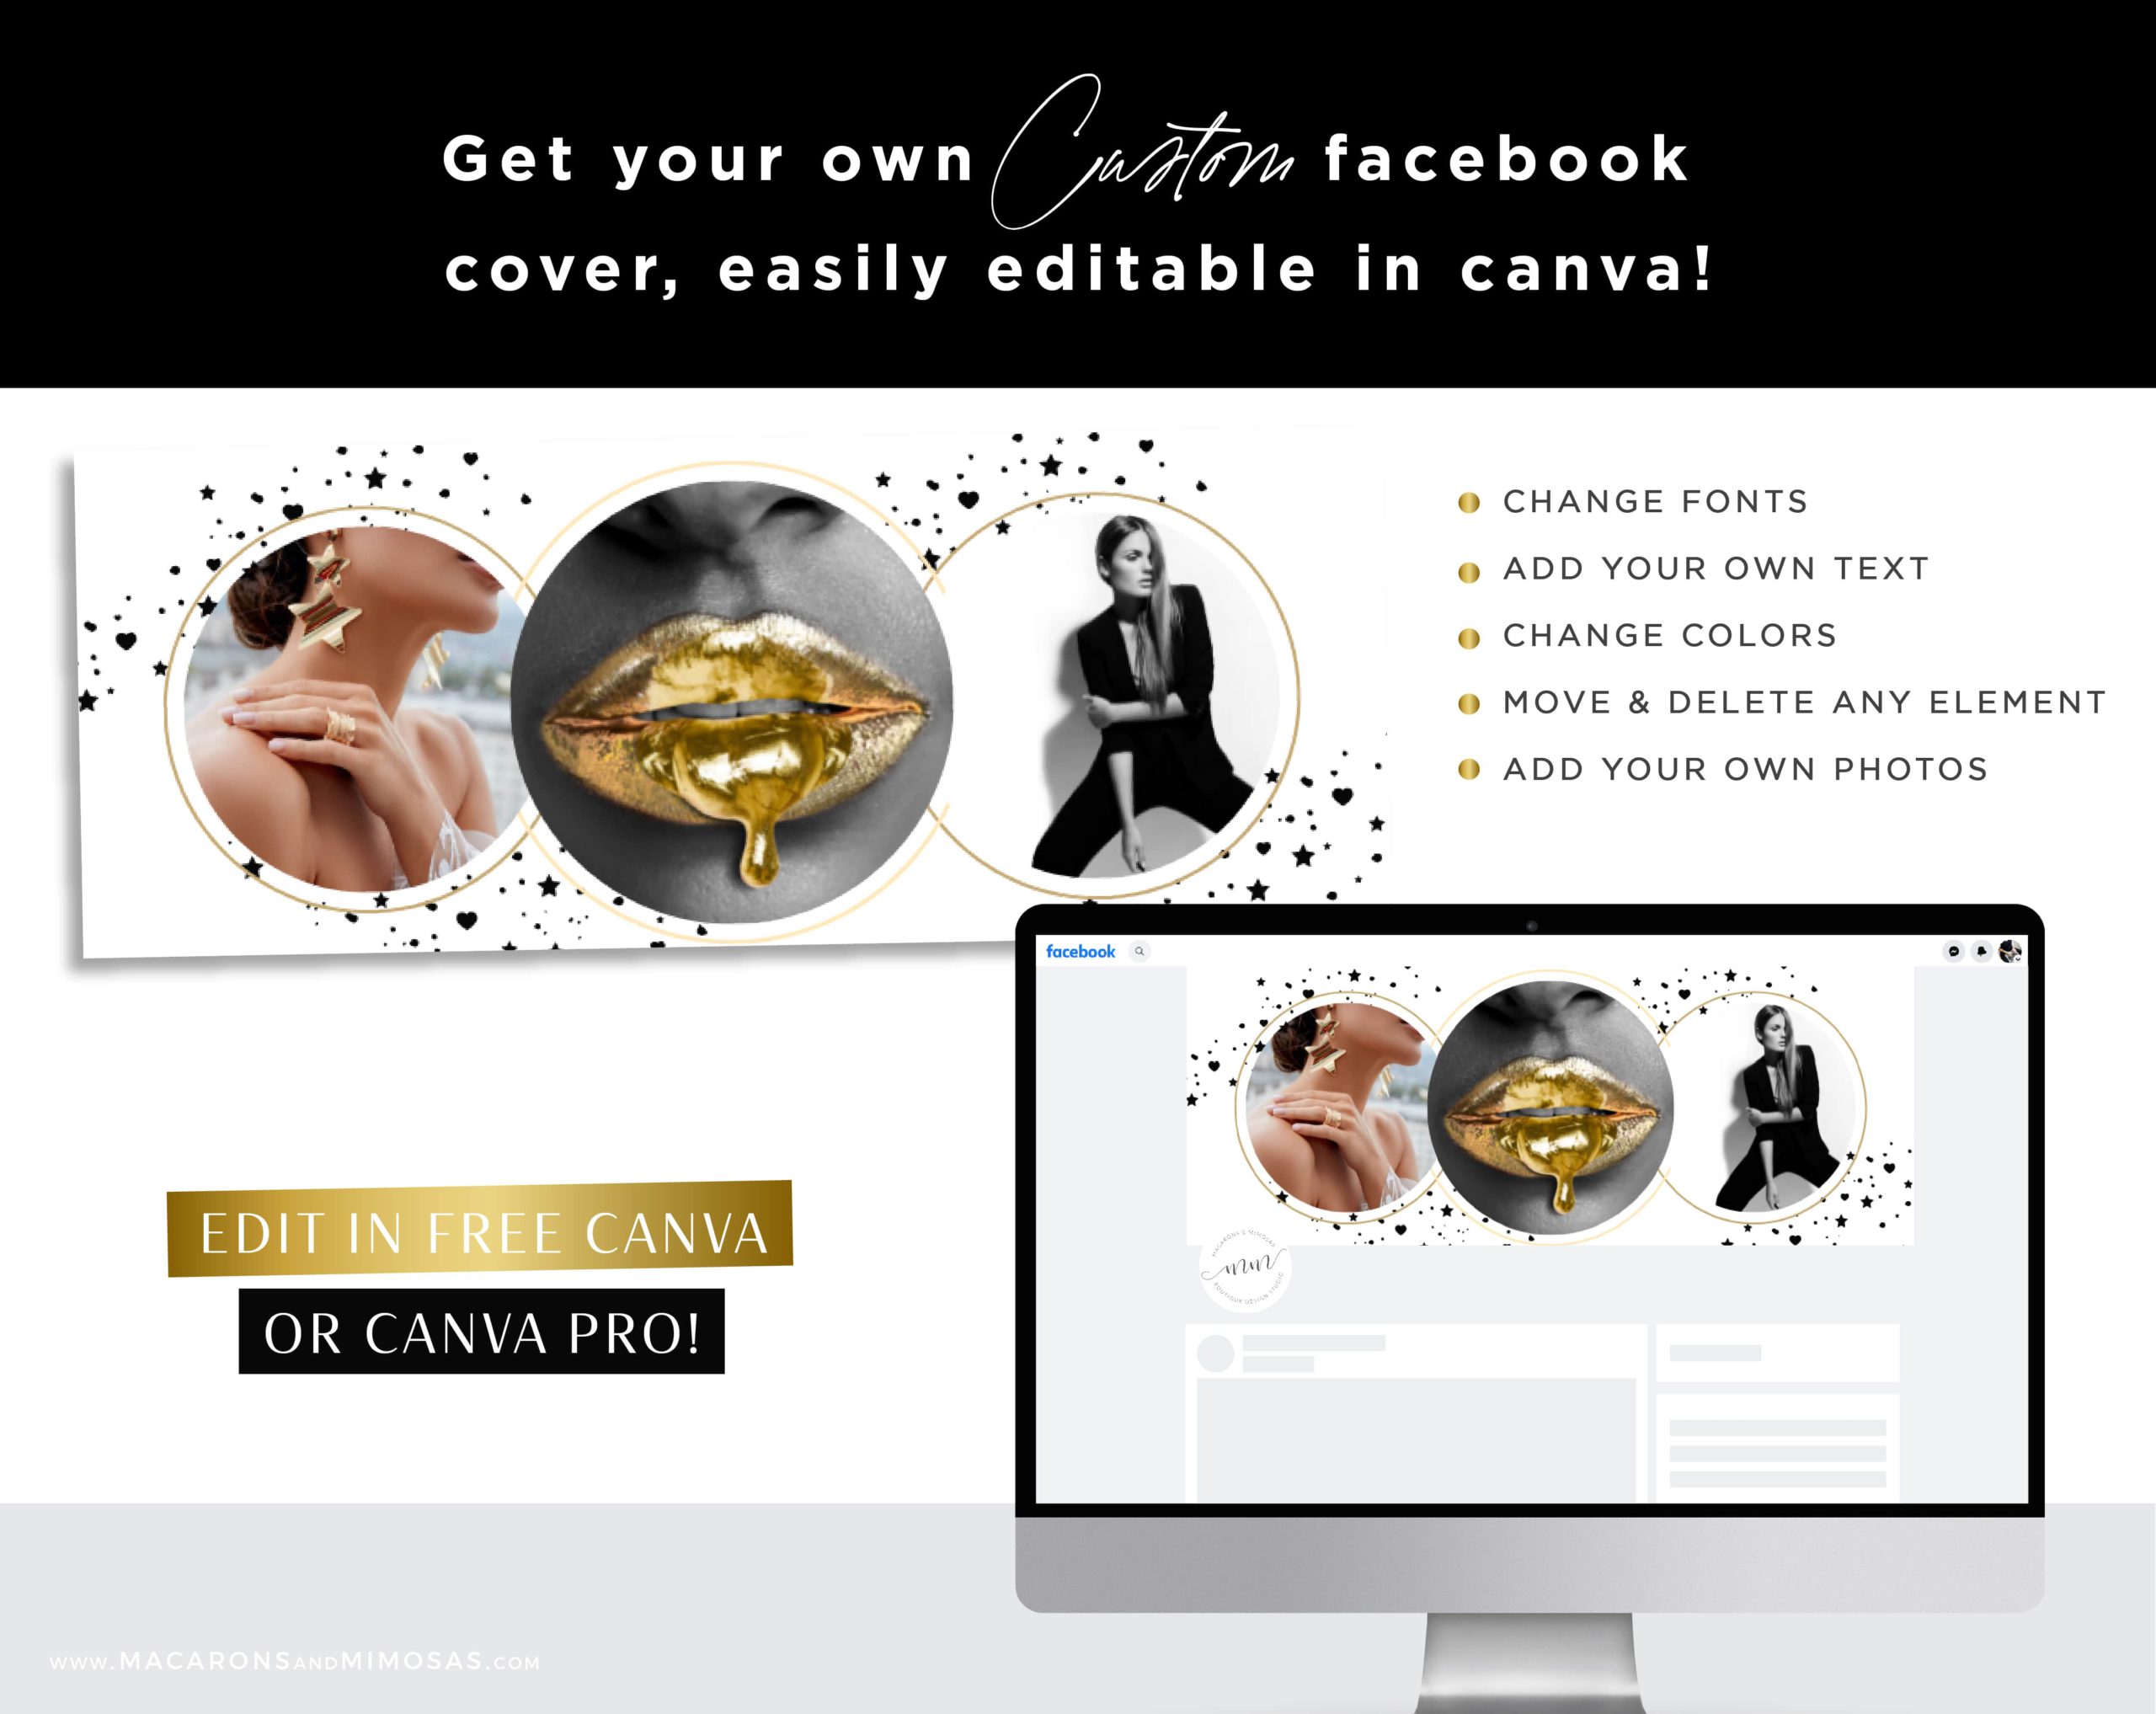 Metallic Gold Heart & Star Facebook Banner Template in chic feminine black and metallic gold. Editable in Canva, DIY Facebook Templates for Canva edit to fit your brand!